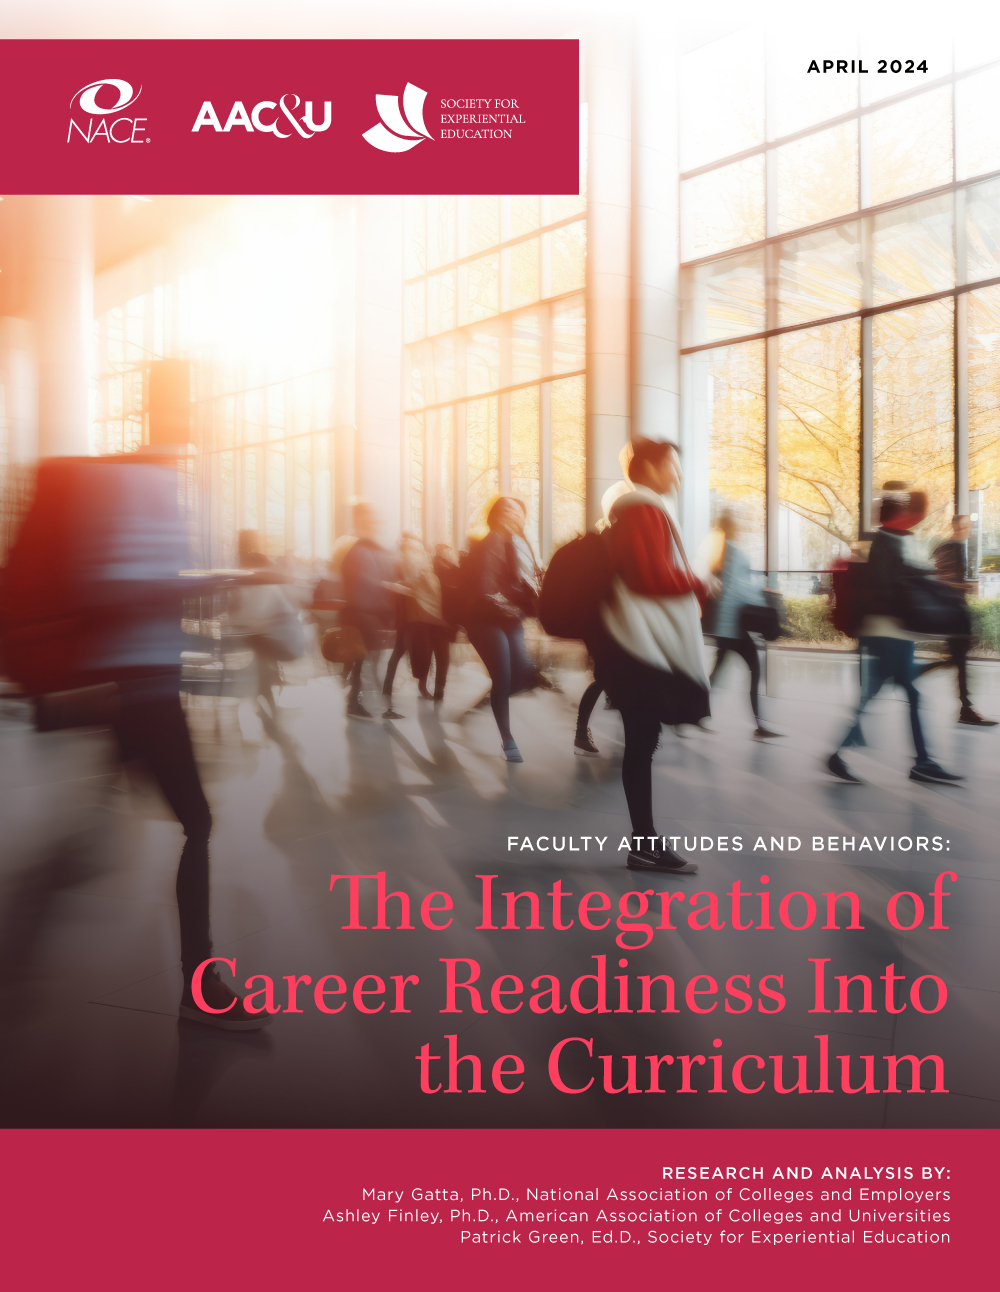 Faculty Attitudes and Behaviors: The Integration of Career Readiness Into the Curriculum